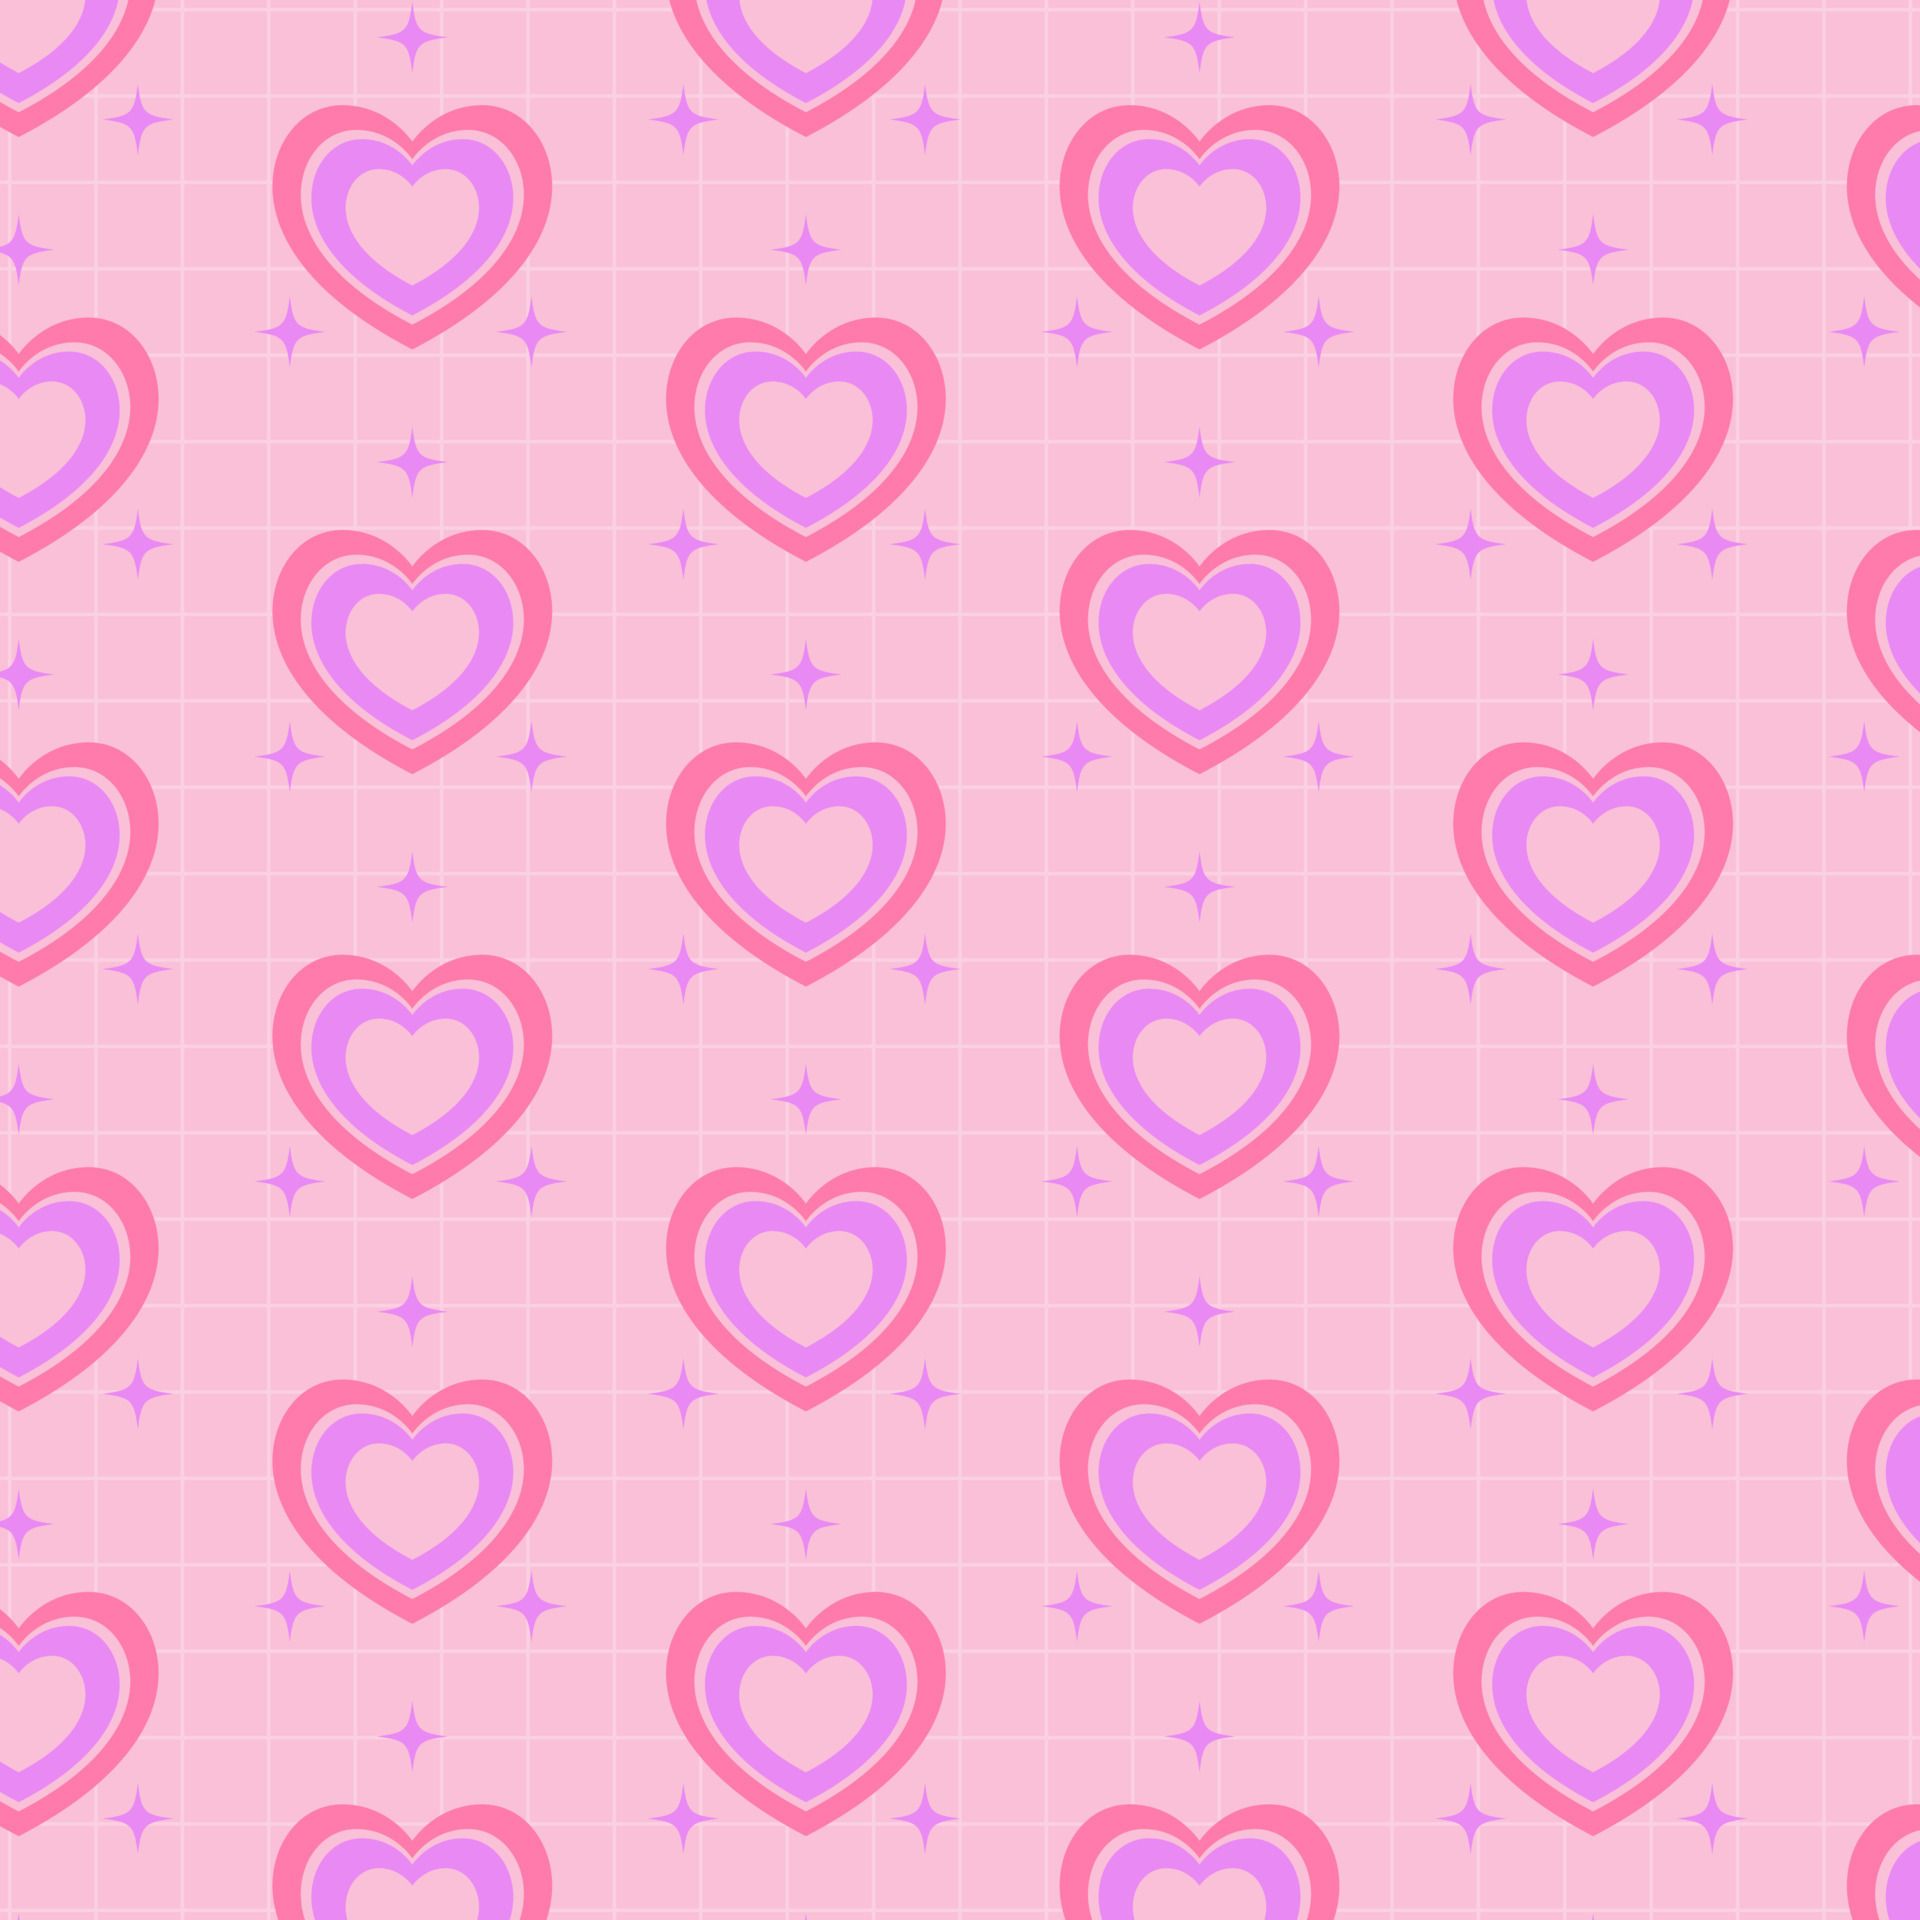 Retro pink groovy psychedelic background. Pink heart aesthetic. Nostalgia for 1980s -1990s